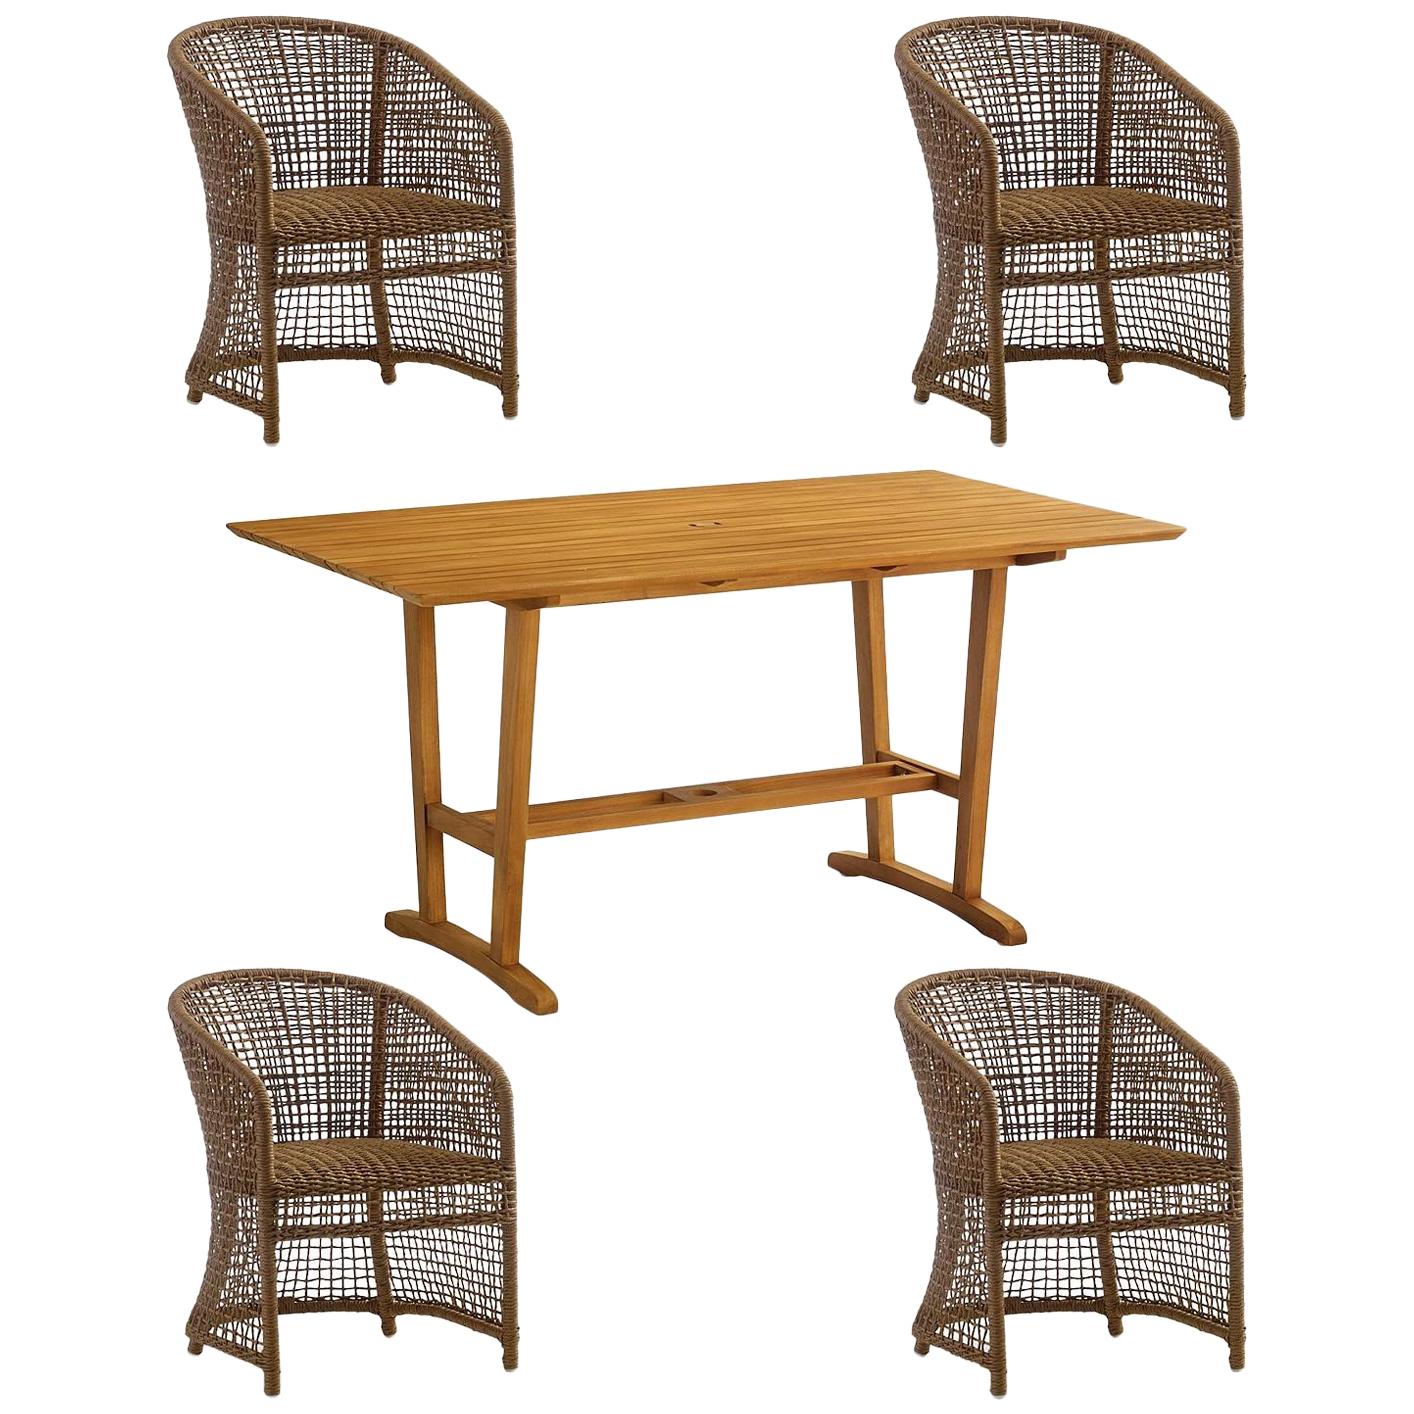 5-Piece Outdoor Dining Set in Woven Naturally Finished Wicker and Teak Wood